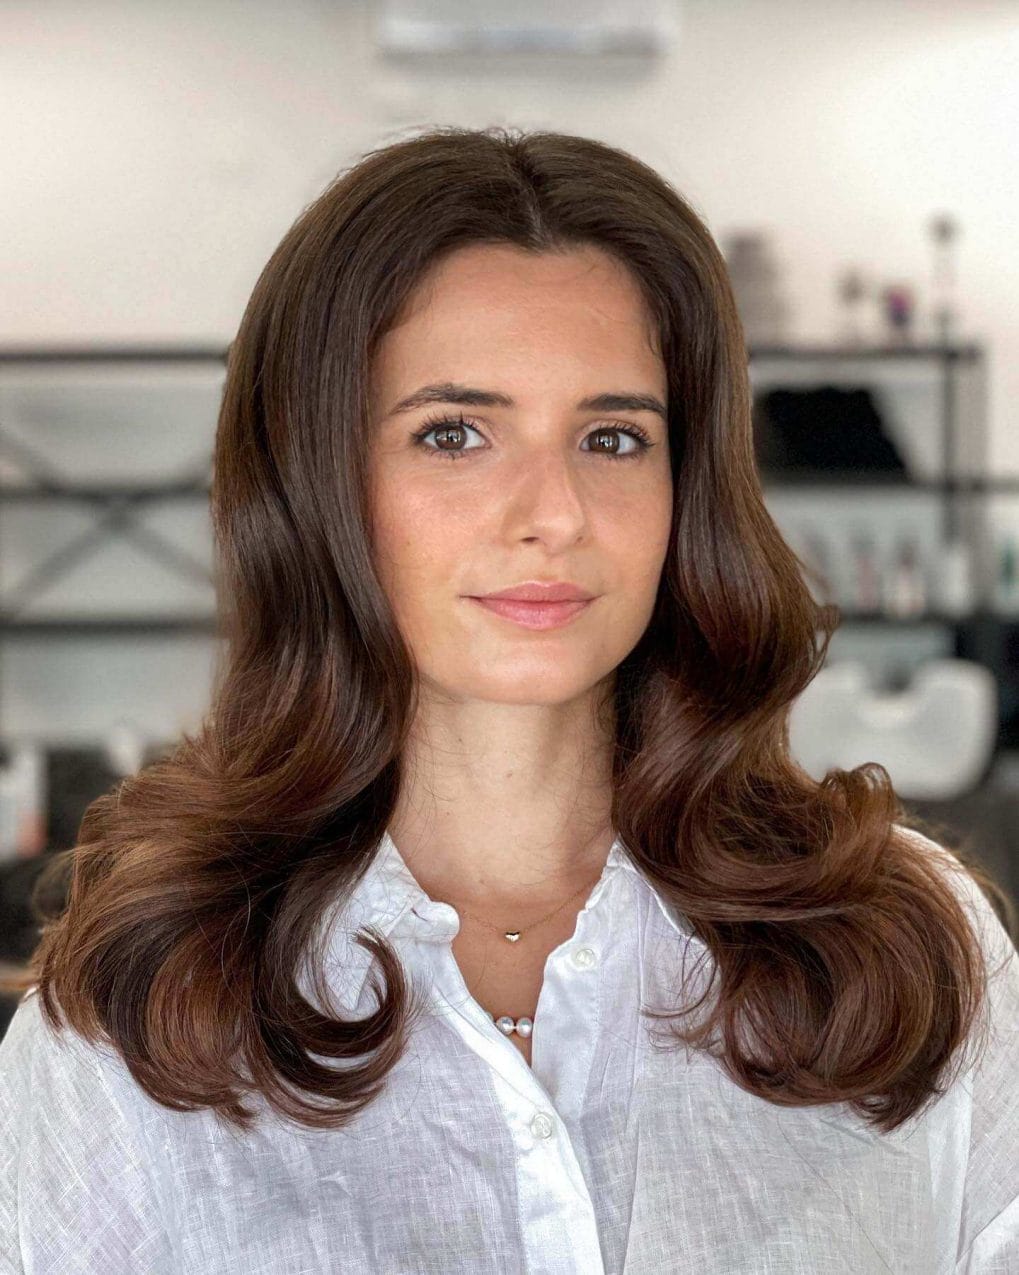 Classic '90s voluminous brunette with auburn highlights, curled blowout ends.